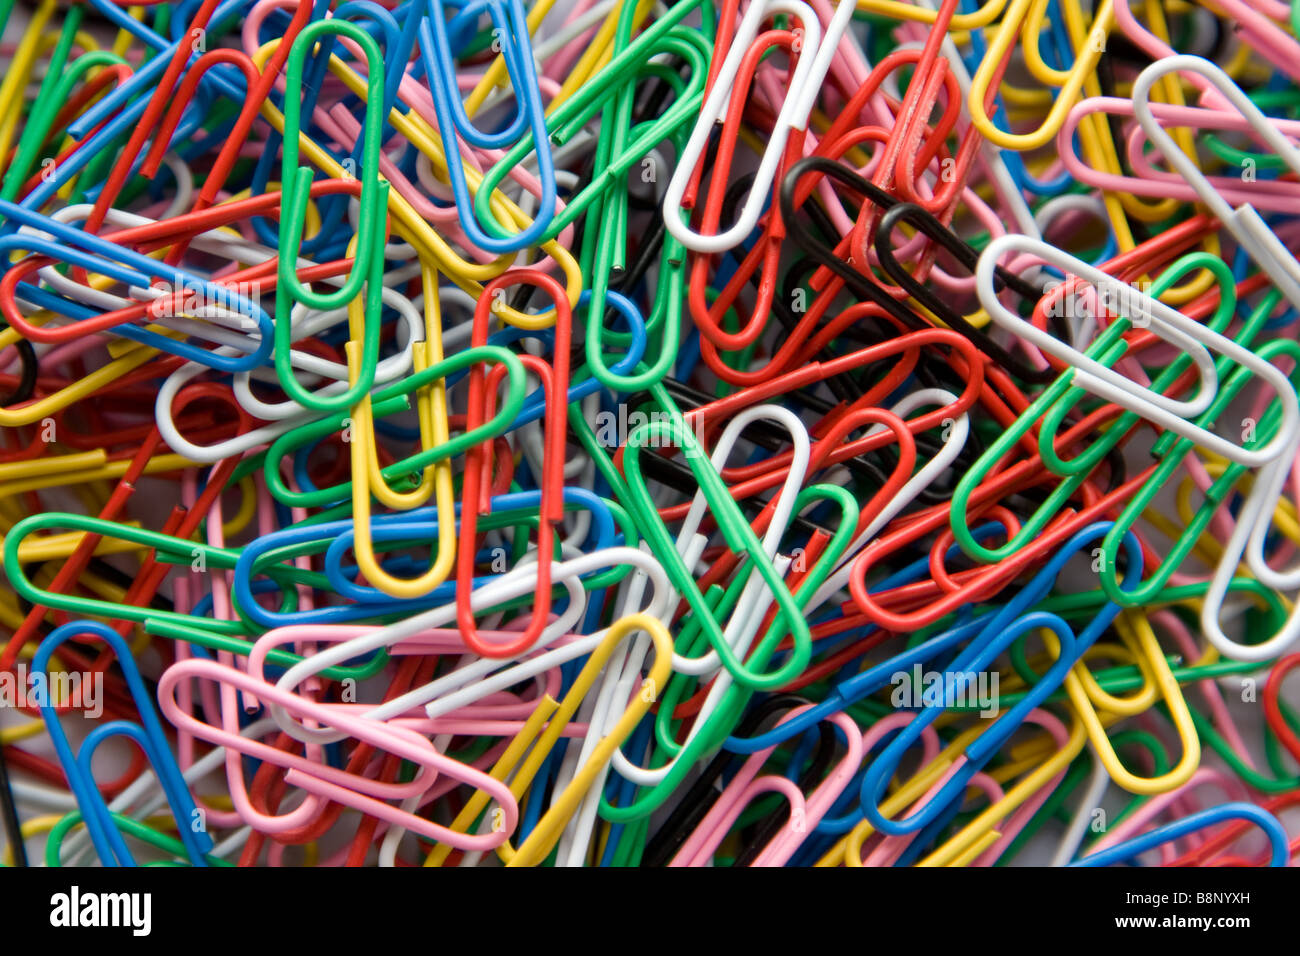 Brightly coloured paper clips Stock Photo